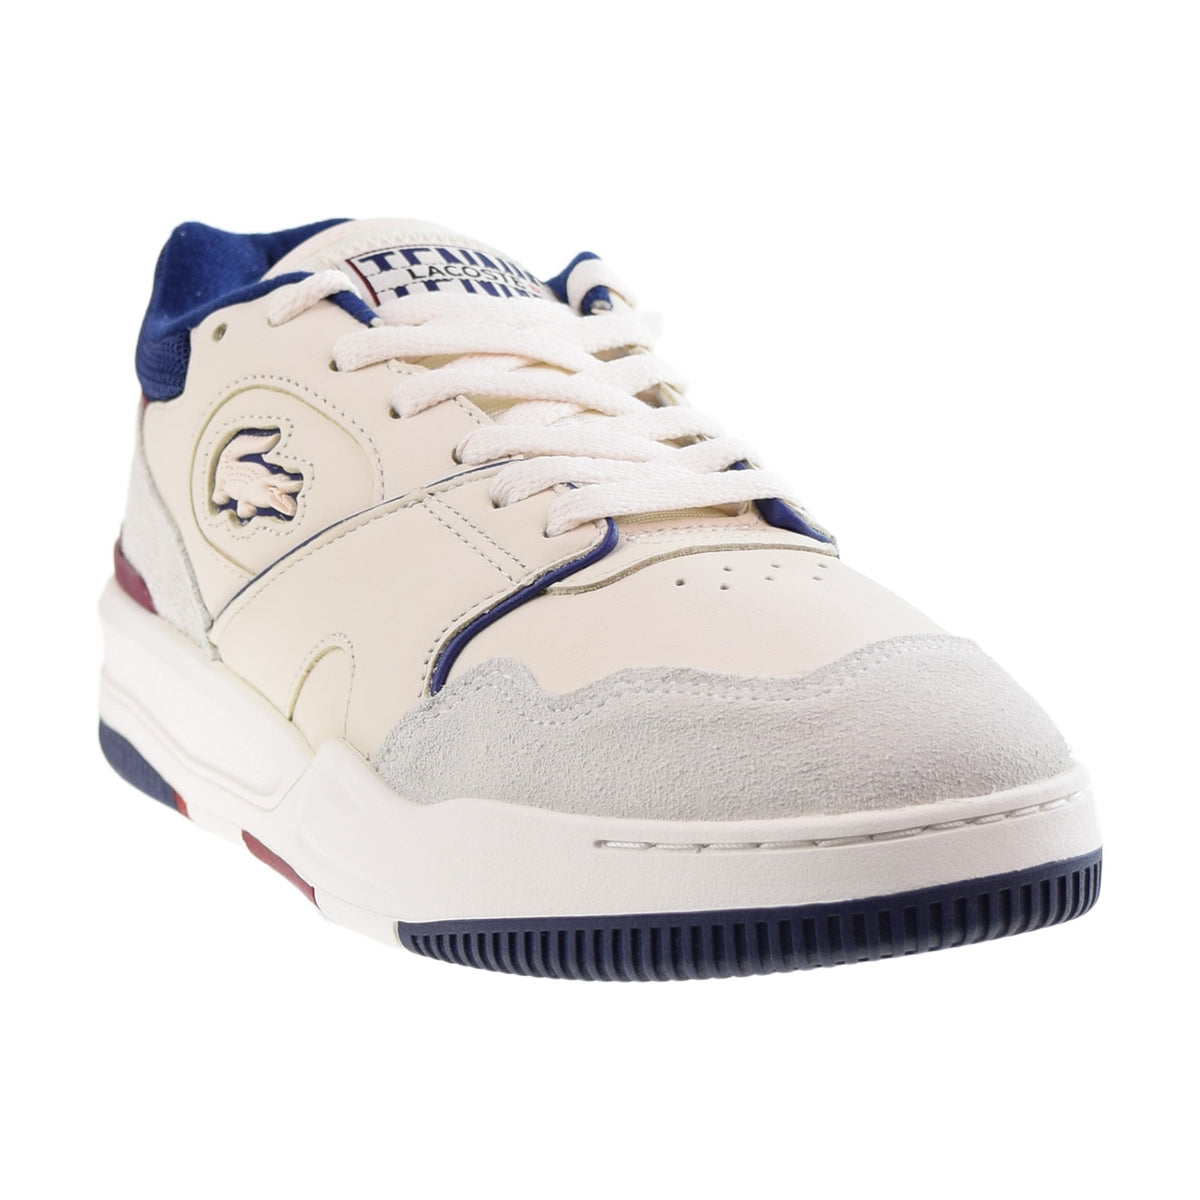 Lacoste Lineshot 223 3 SMA Men's Shoes Off White-Navy